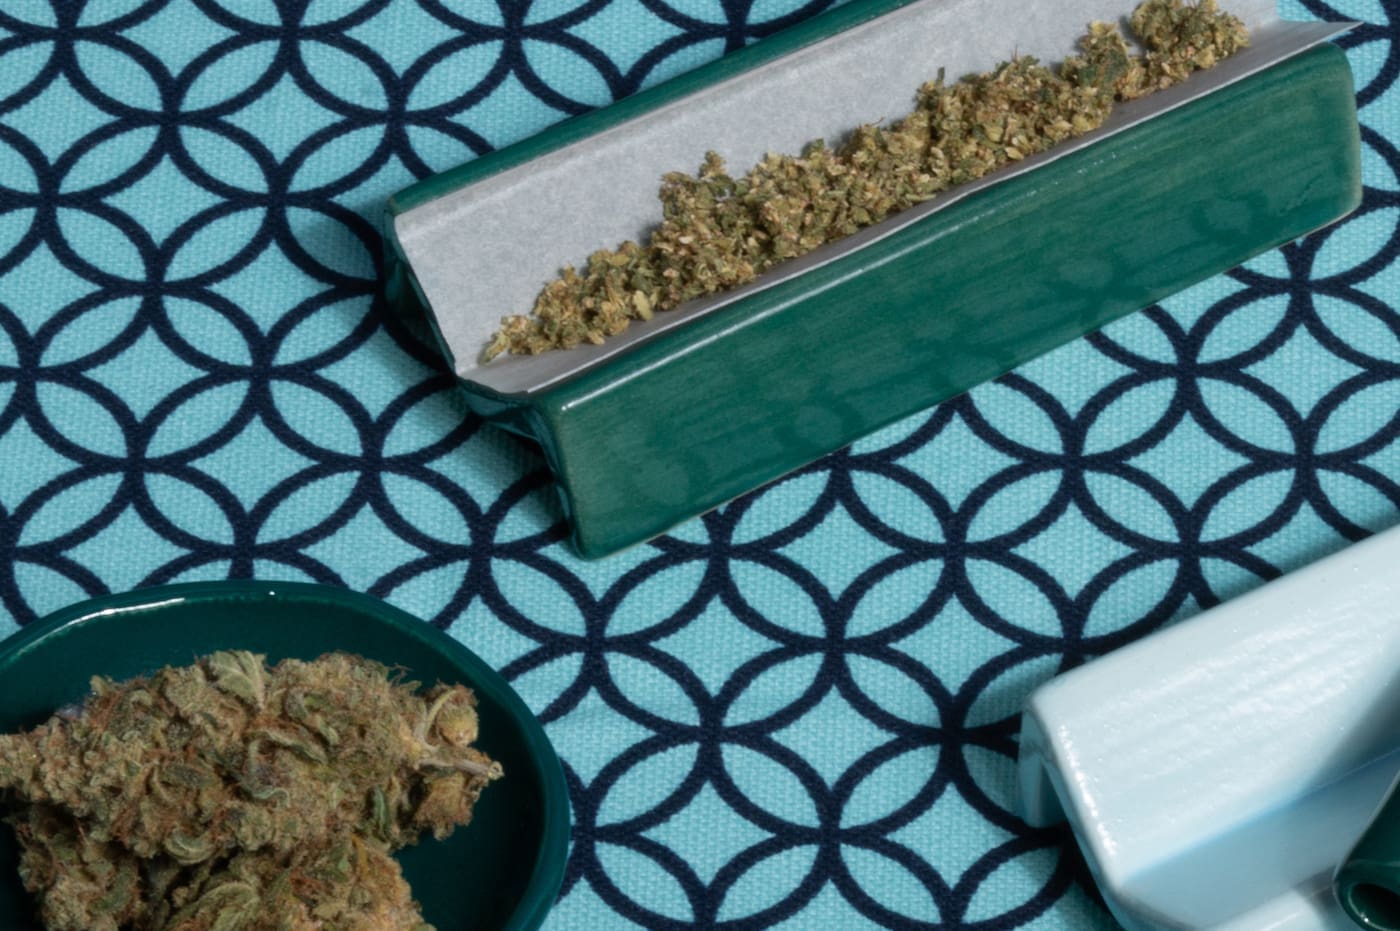 Check out our cannabis strain guide because good bud is about a lot more than looks!